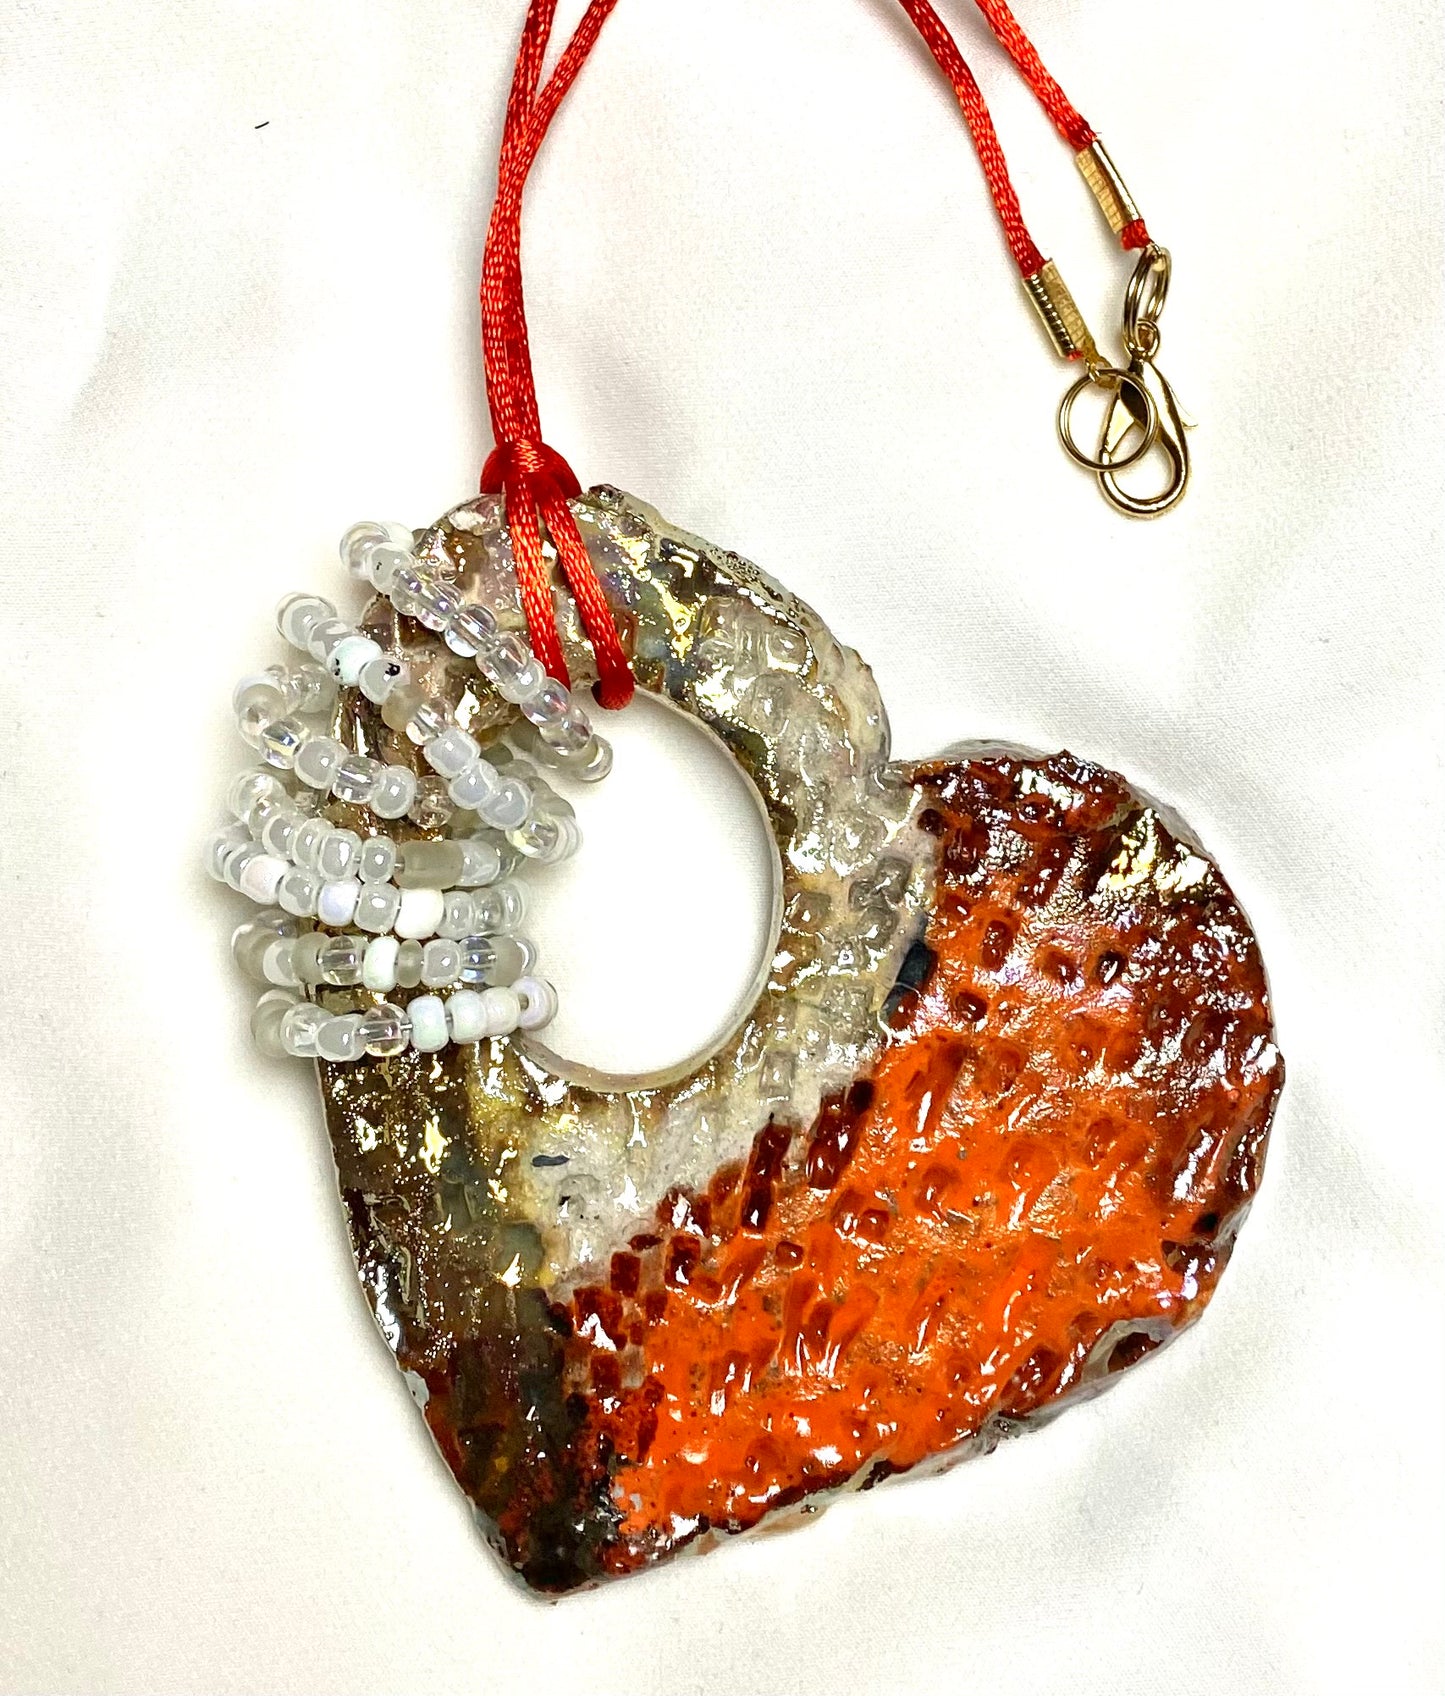 Have A Heart ! Each heart pendant is handmade with love! It is 3"x 3"and weighs approx. 3ozs. This pendant has a red violet and gold metallic raku glazes that renders a unique translucent  patina. The heart has a textured pattern . Both sides are  are different and equally beautiful! It holds a spiral of white and clear mini beads on a spiral copper wire. This pendant has a nice 12" red suede cord!